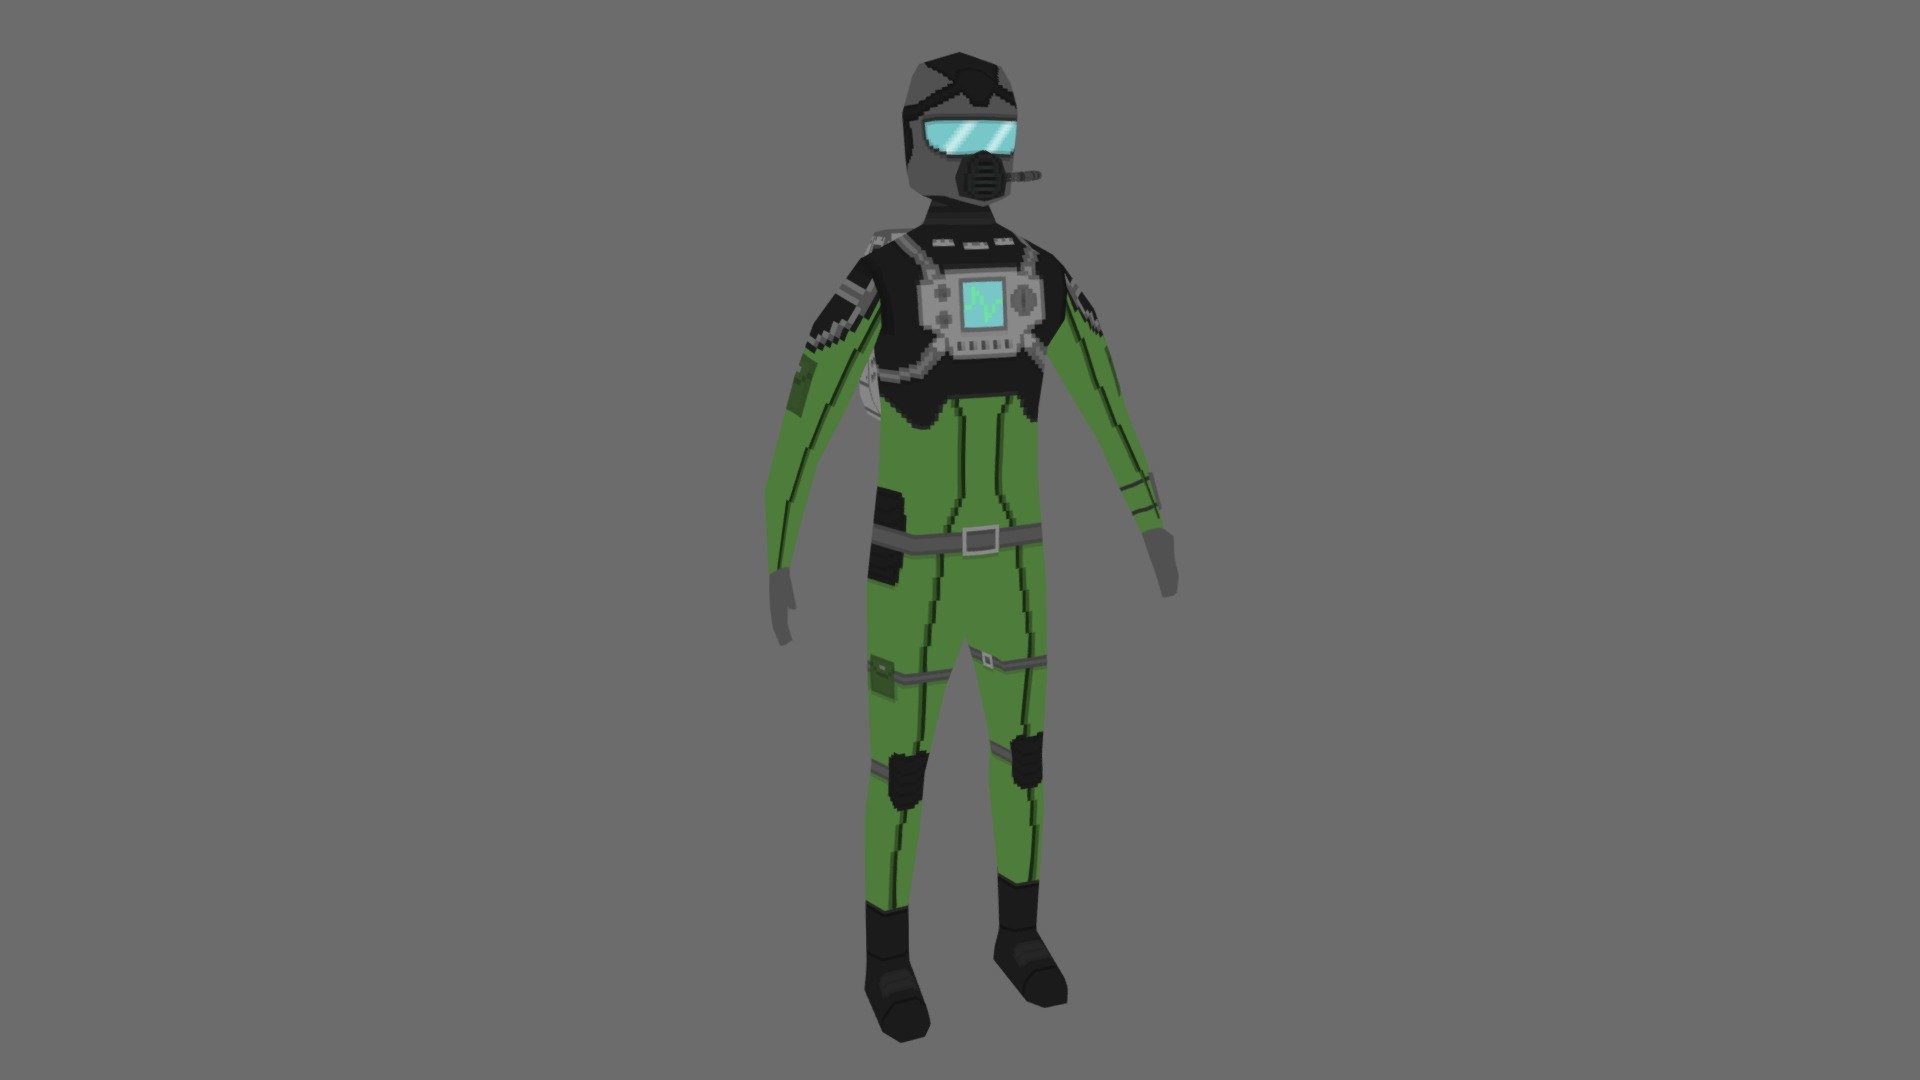 [Low Poly] Retro Sci-Fi Industrial Worker